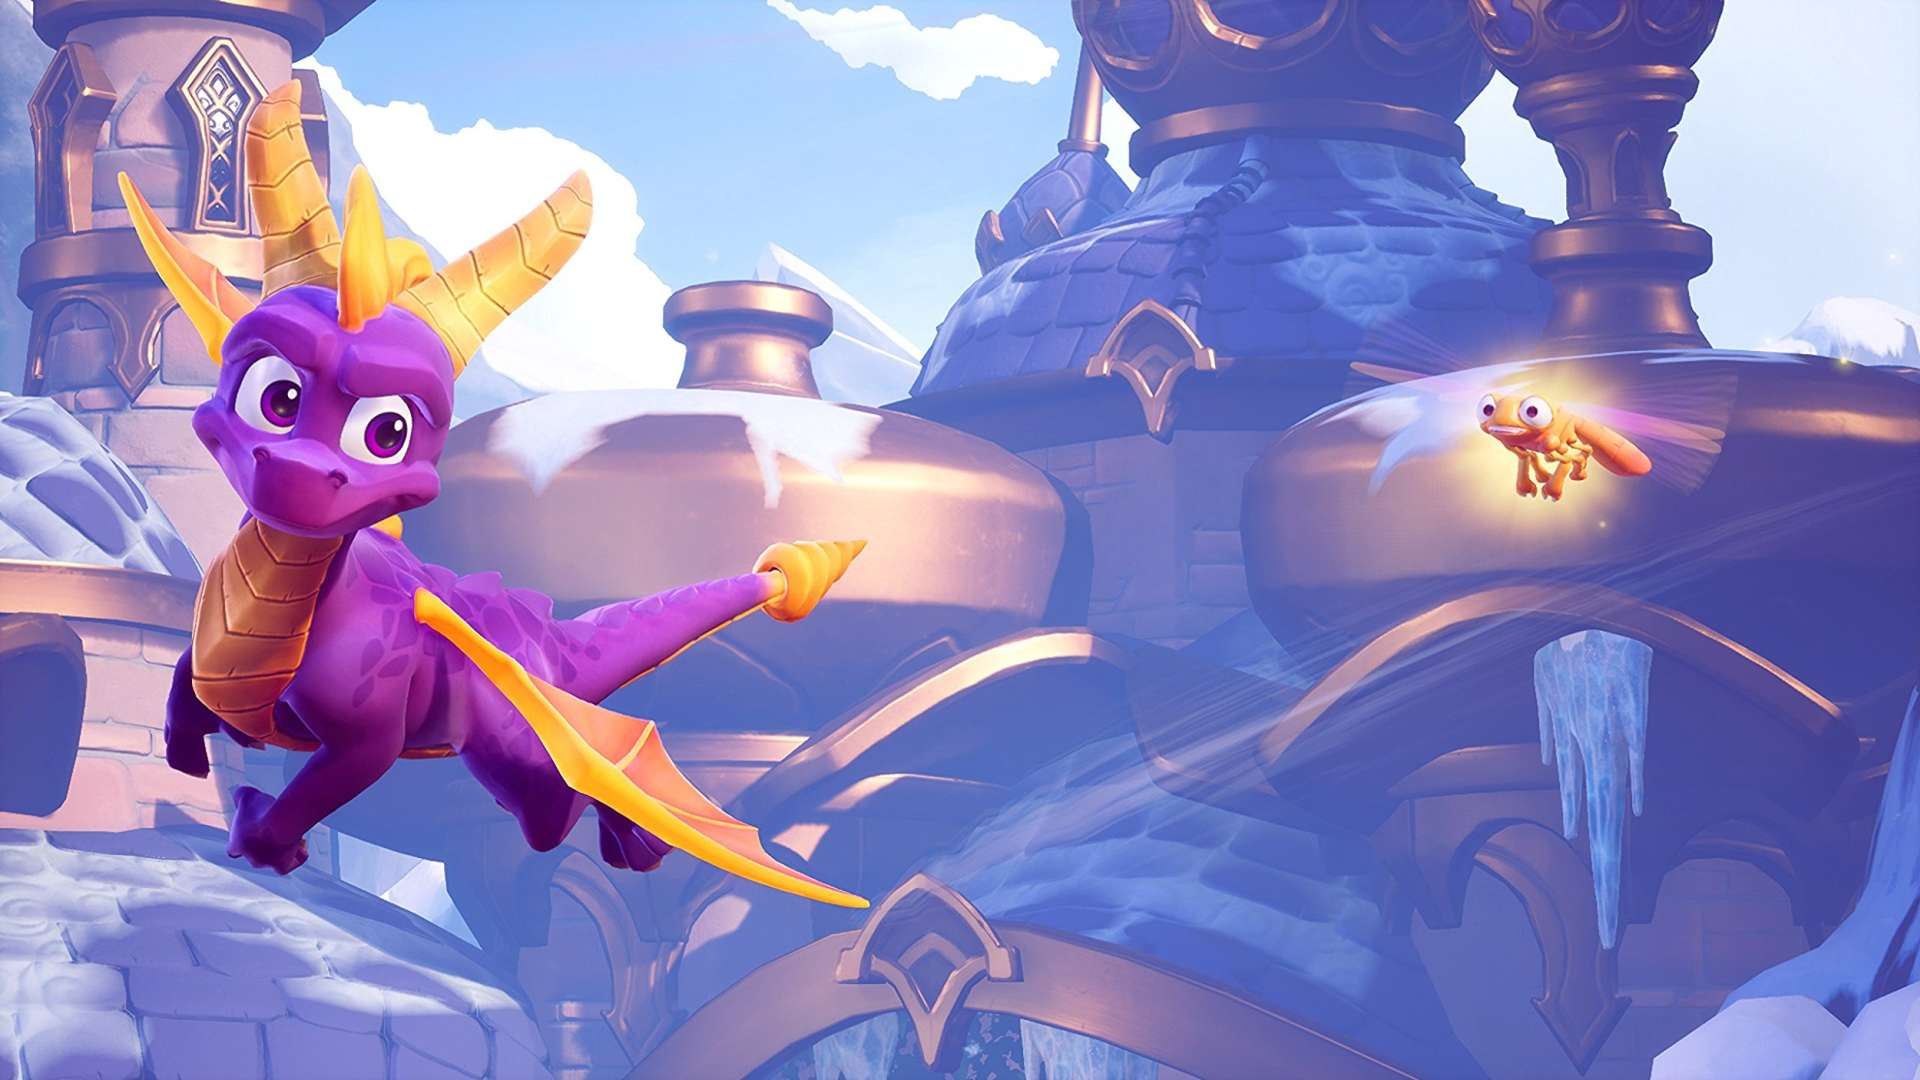 e3-2018-check-out-the-final-cover-art-for-spyro-reignited-trilogy